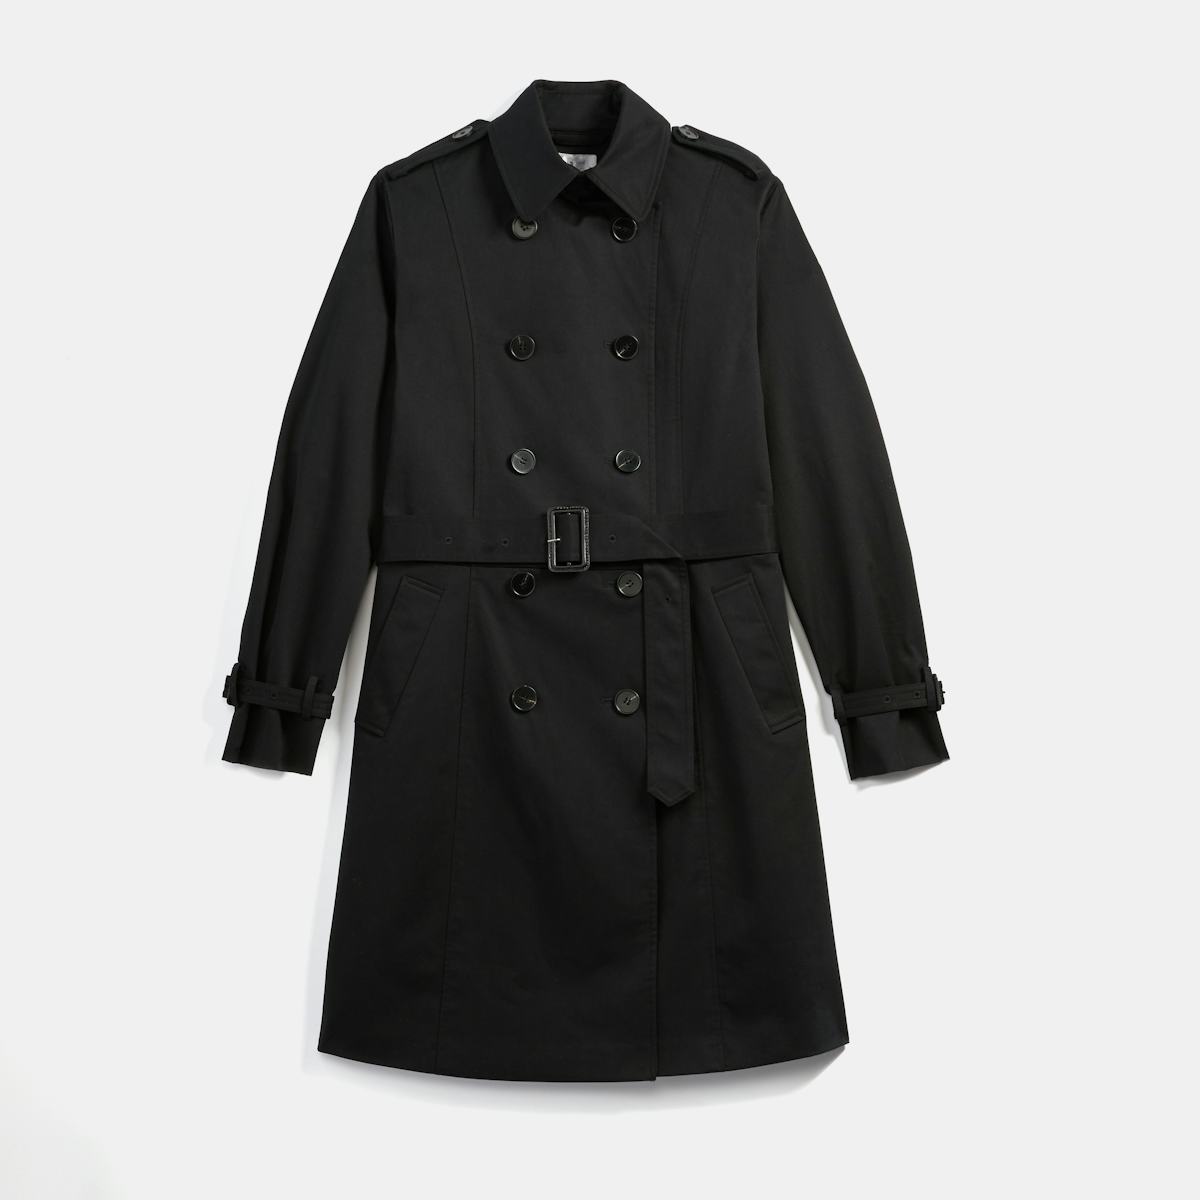 DoubleBreastedButtonTrenchCoat_Black_Womens_Product_Small_1x1_0260.jpg